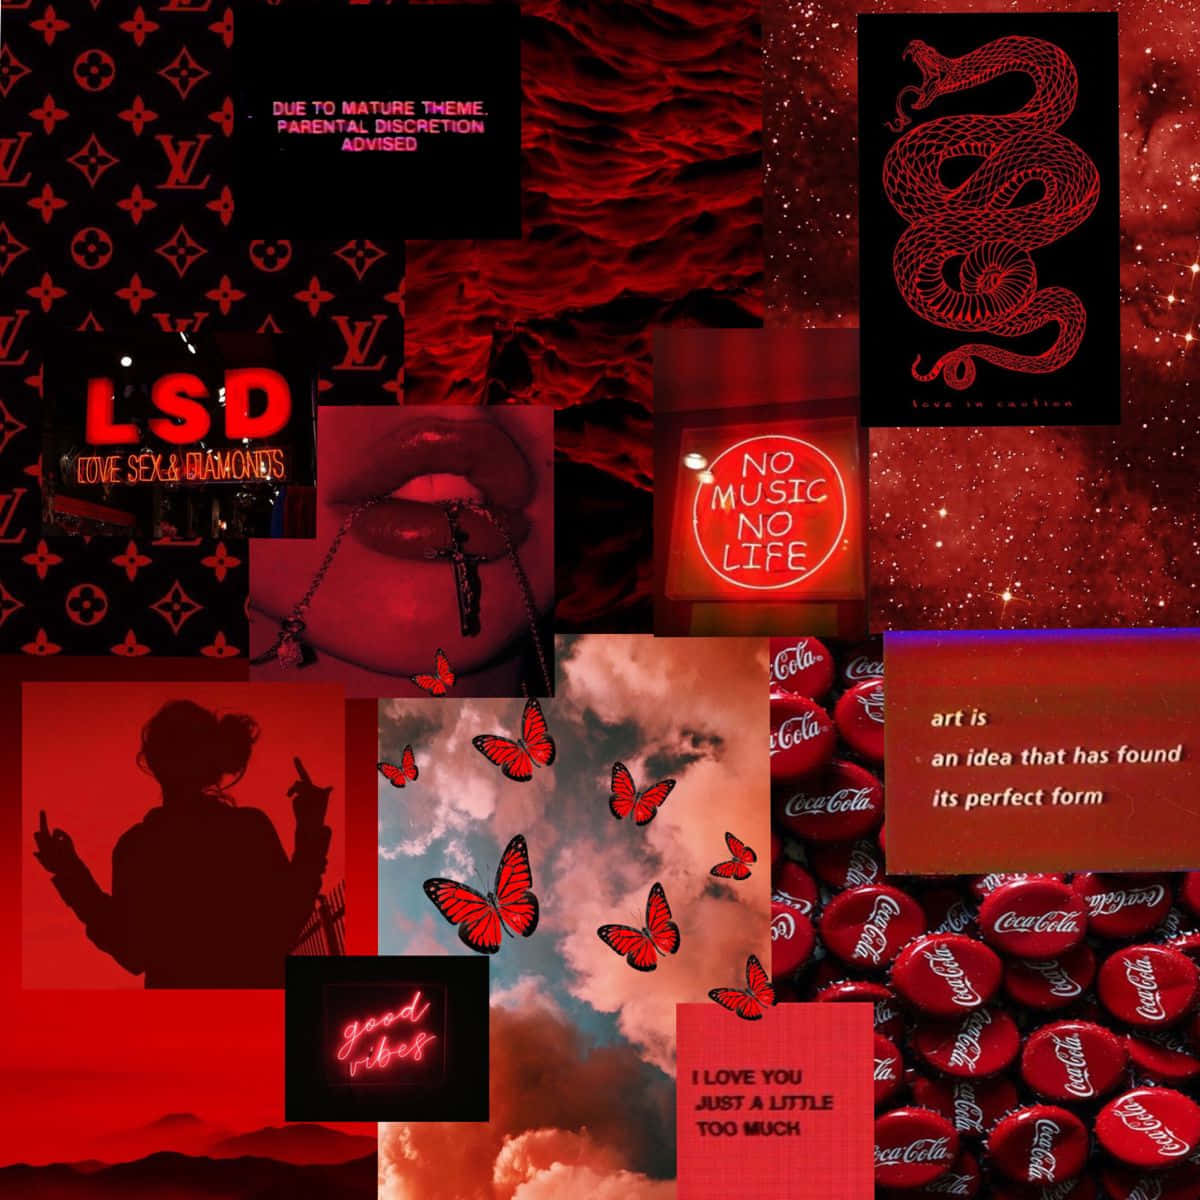 Download A Collage Of Red And Black Images Wallpaper | Wallpapers.com